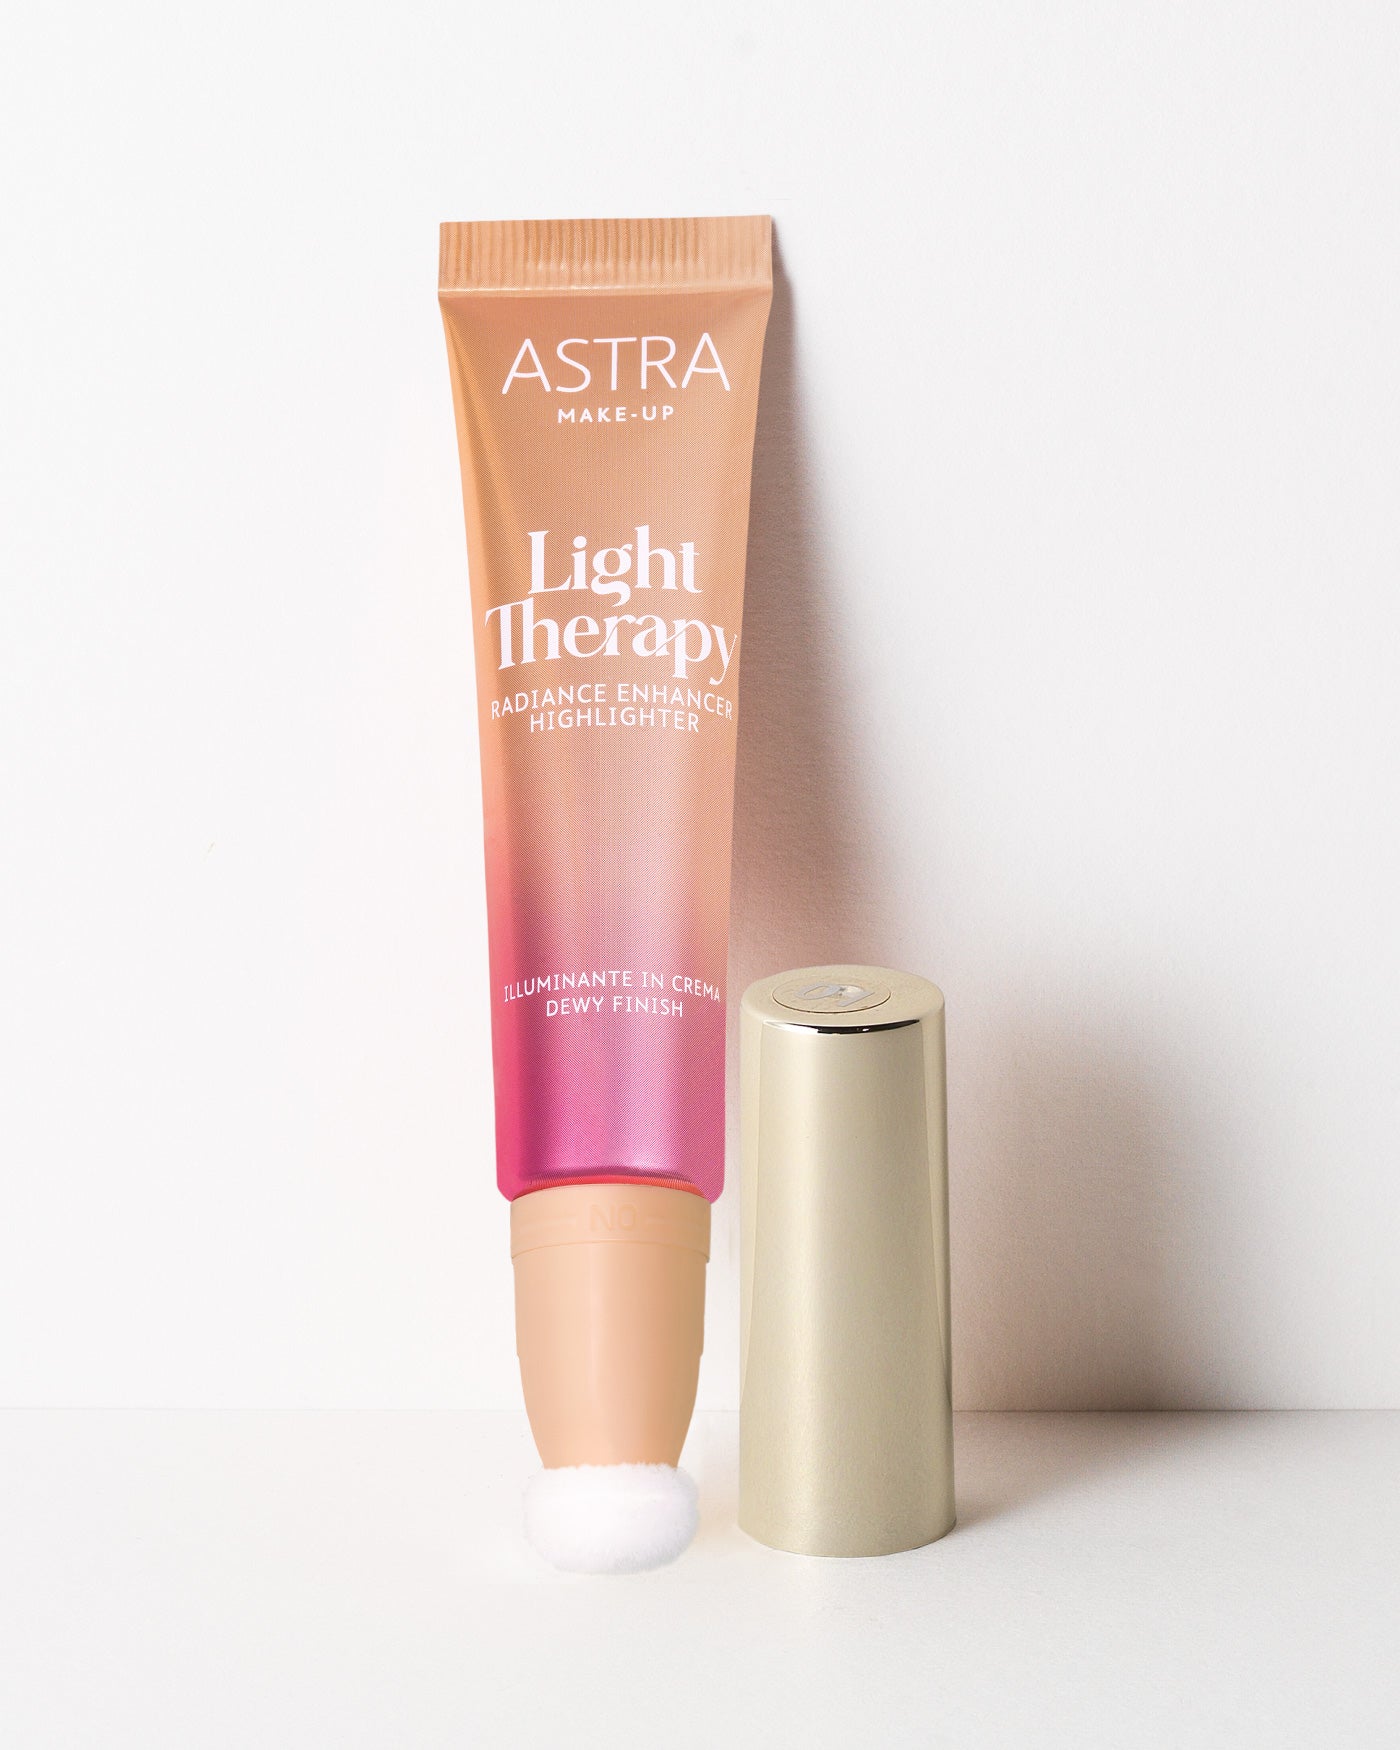 LIGHT THERAPY - Best Seller - Astra Make-Up